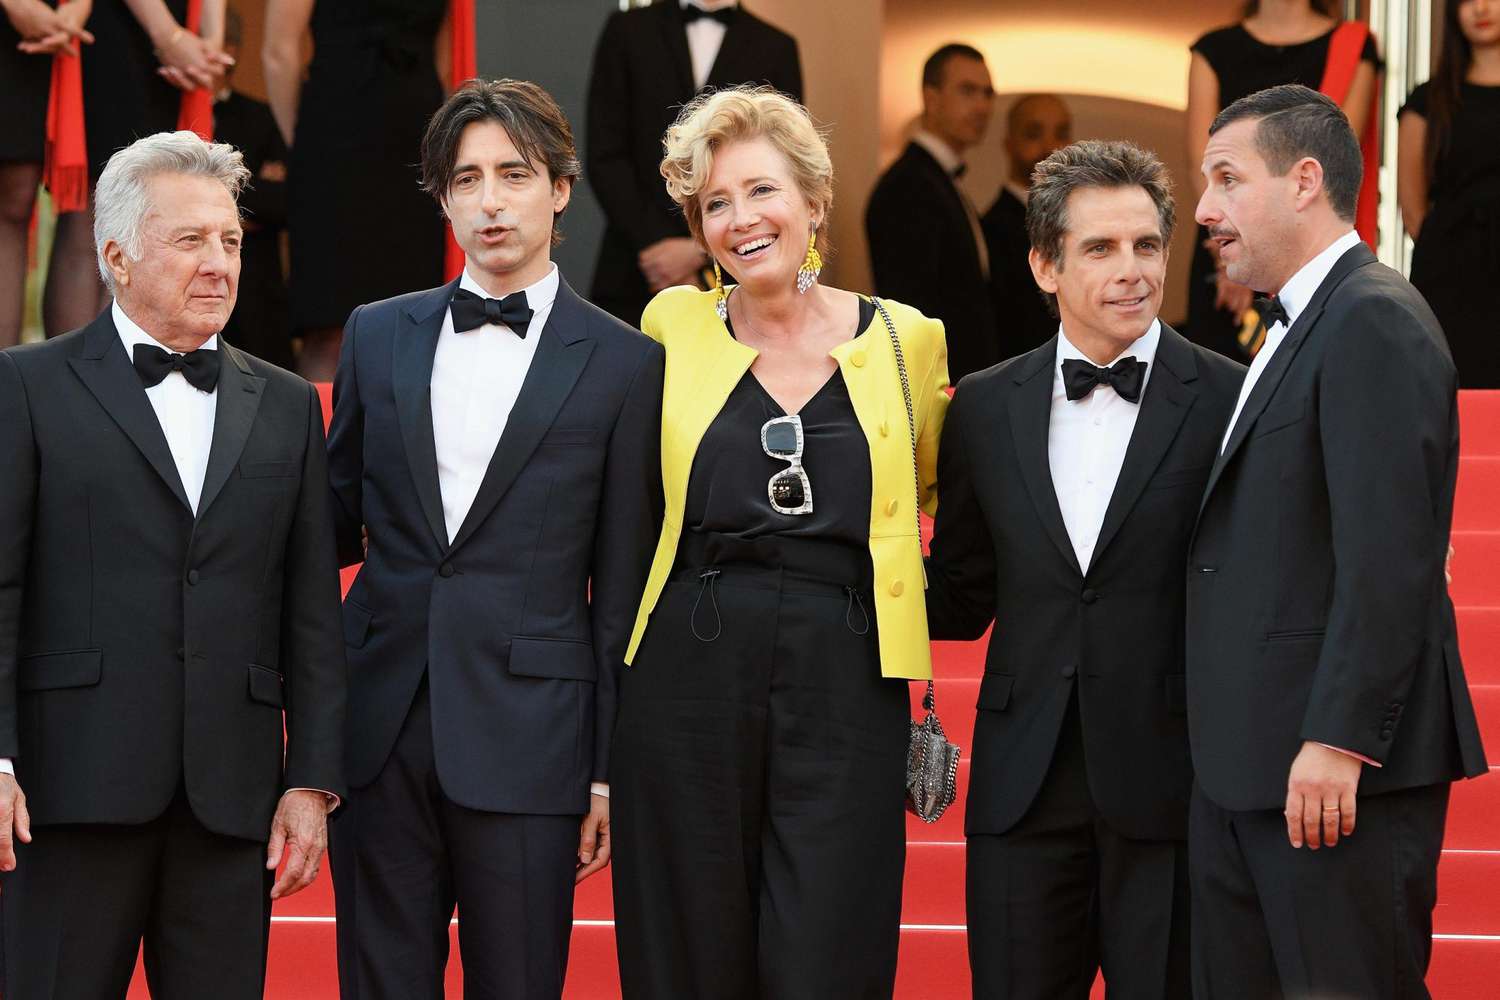 "The Meyerowitz Stories" Red Carpet Arrivals - The 70th Annual Cannes Film Festival